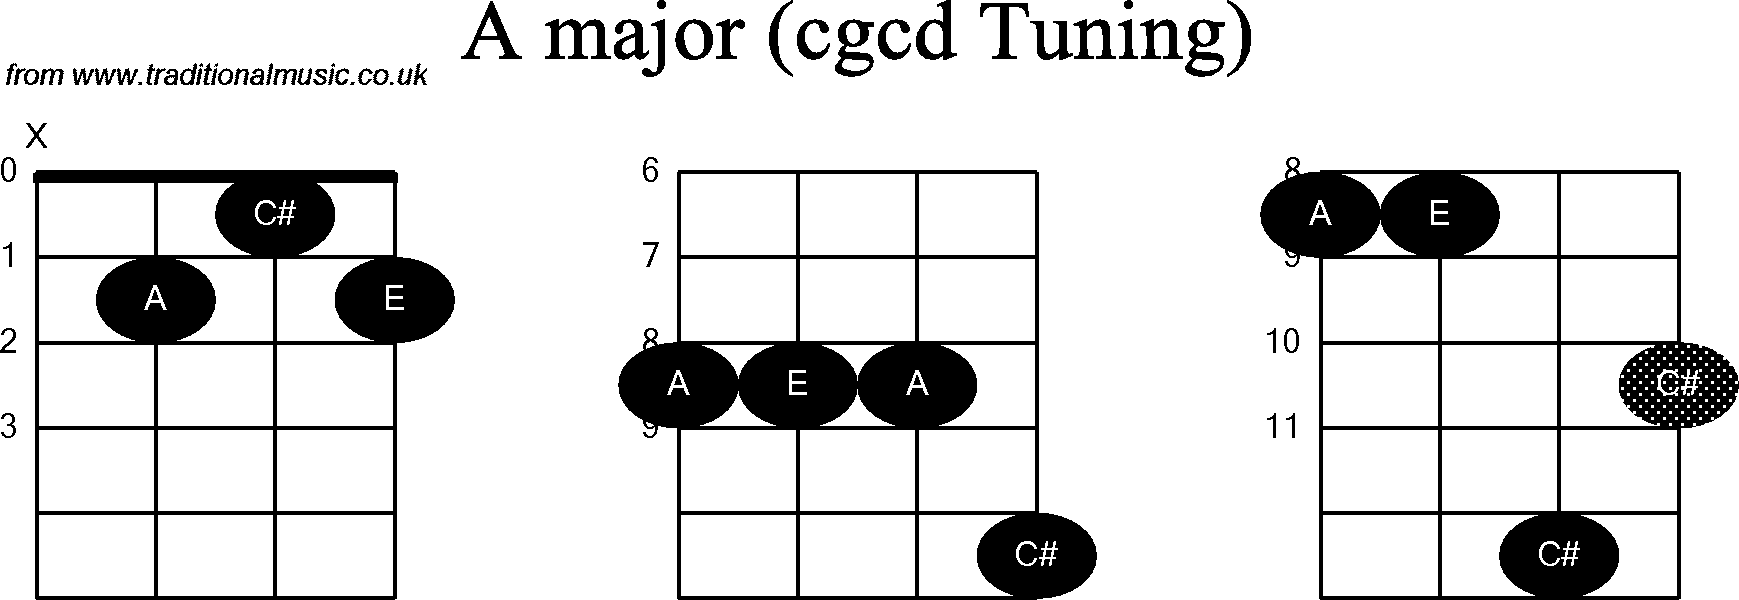 Chord diagrams for Banjo(Double C) A